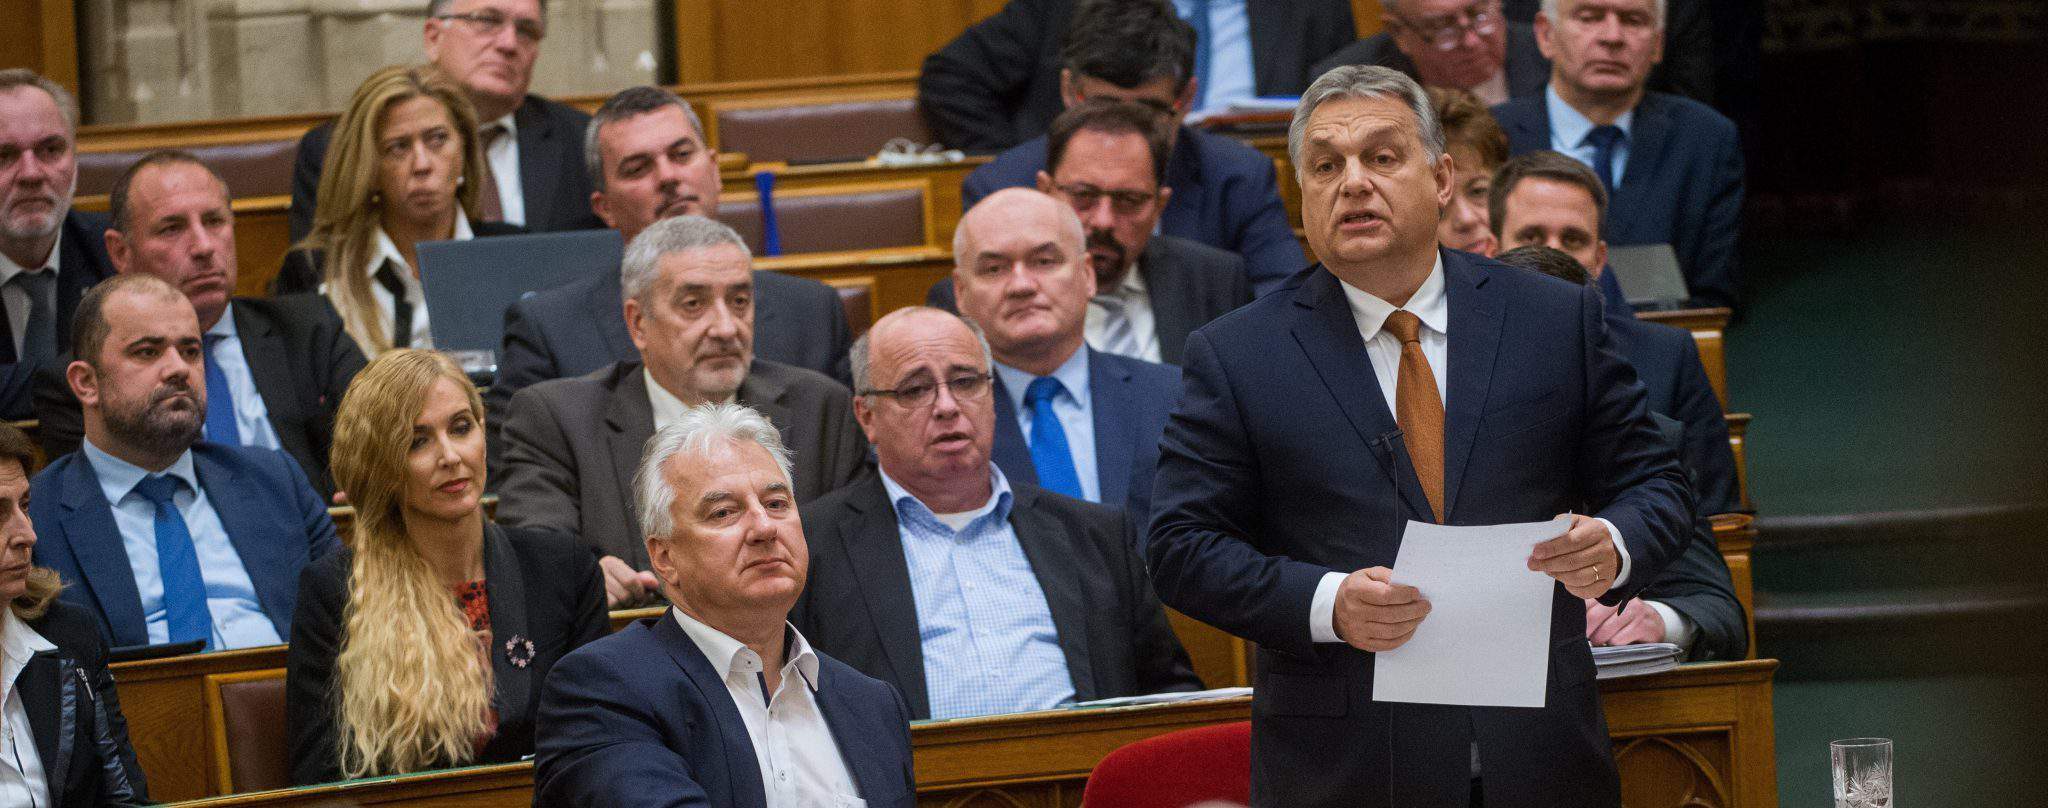 Orban S Cabinet Hungary To Answer In Kind To Political Attacks